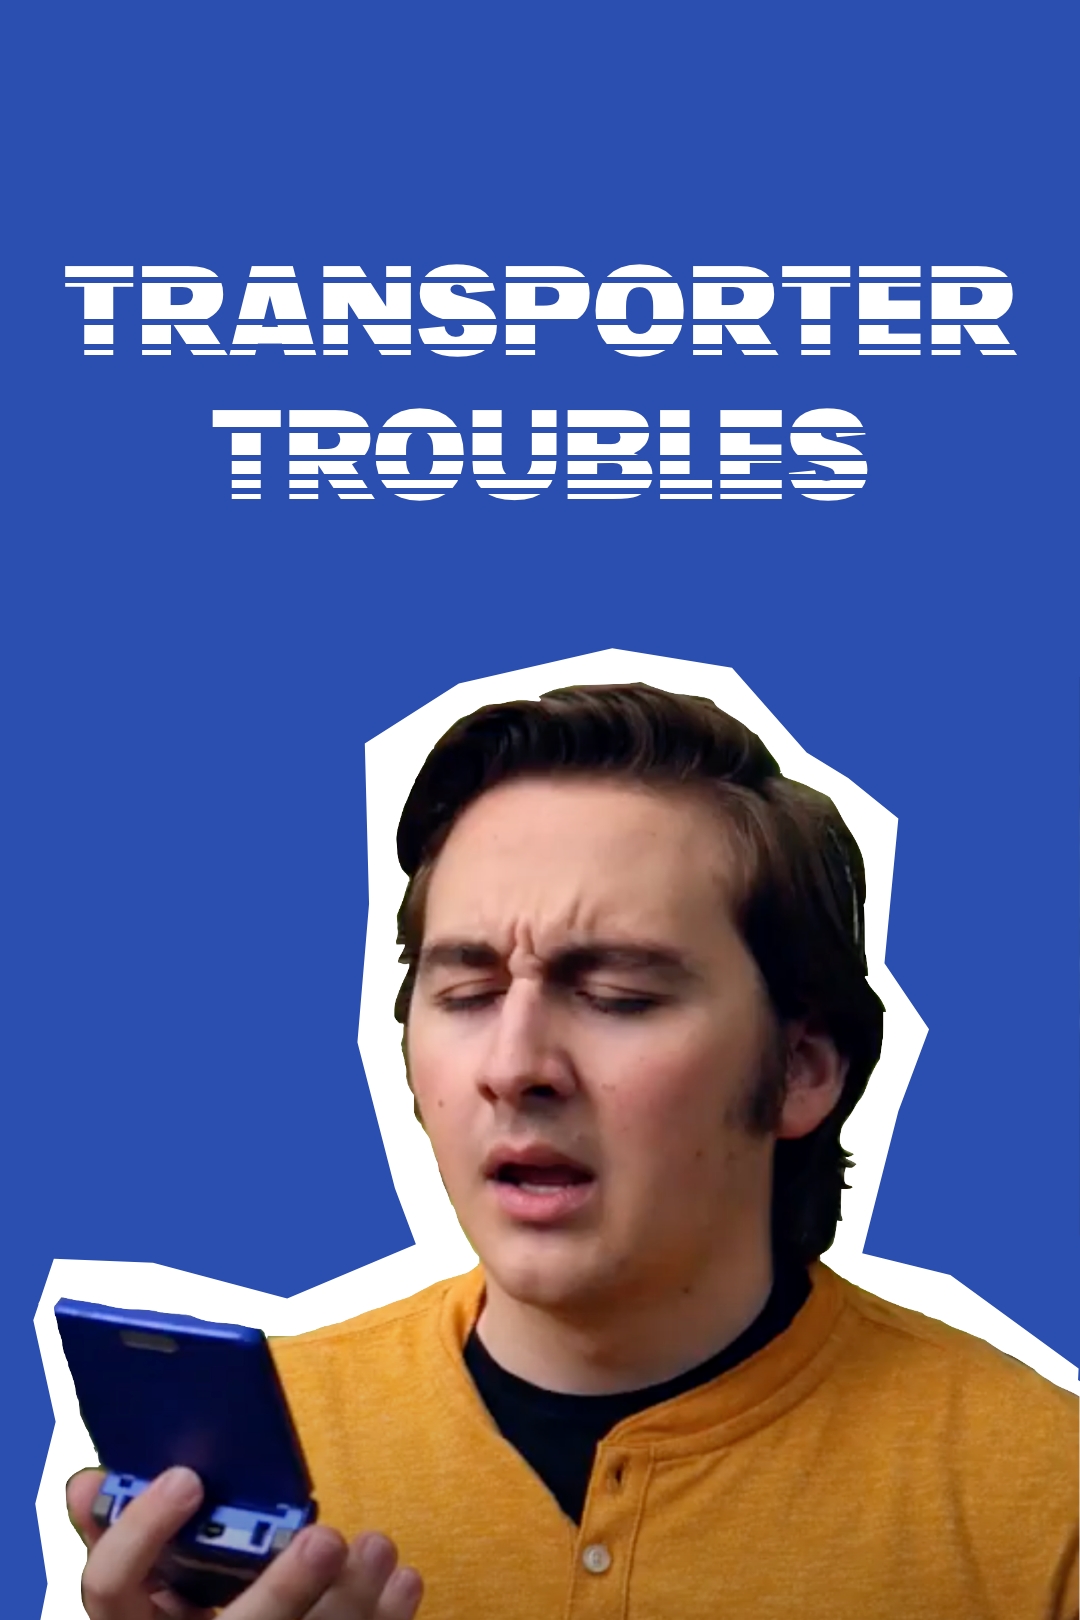 Poster for the film "Transporter Troubles"